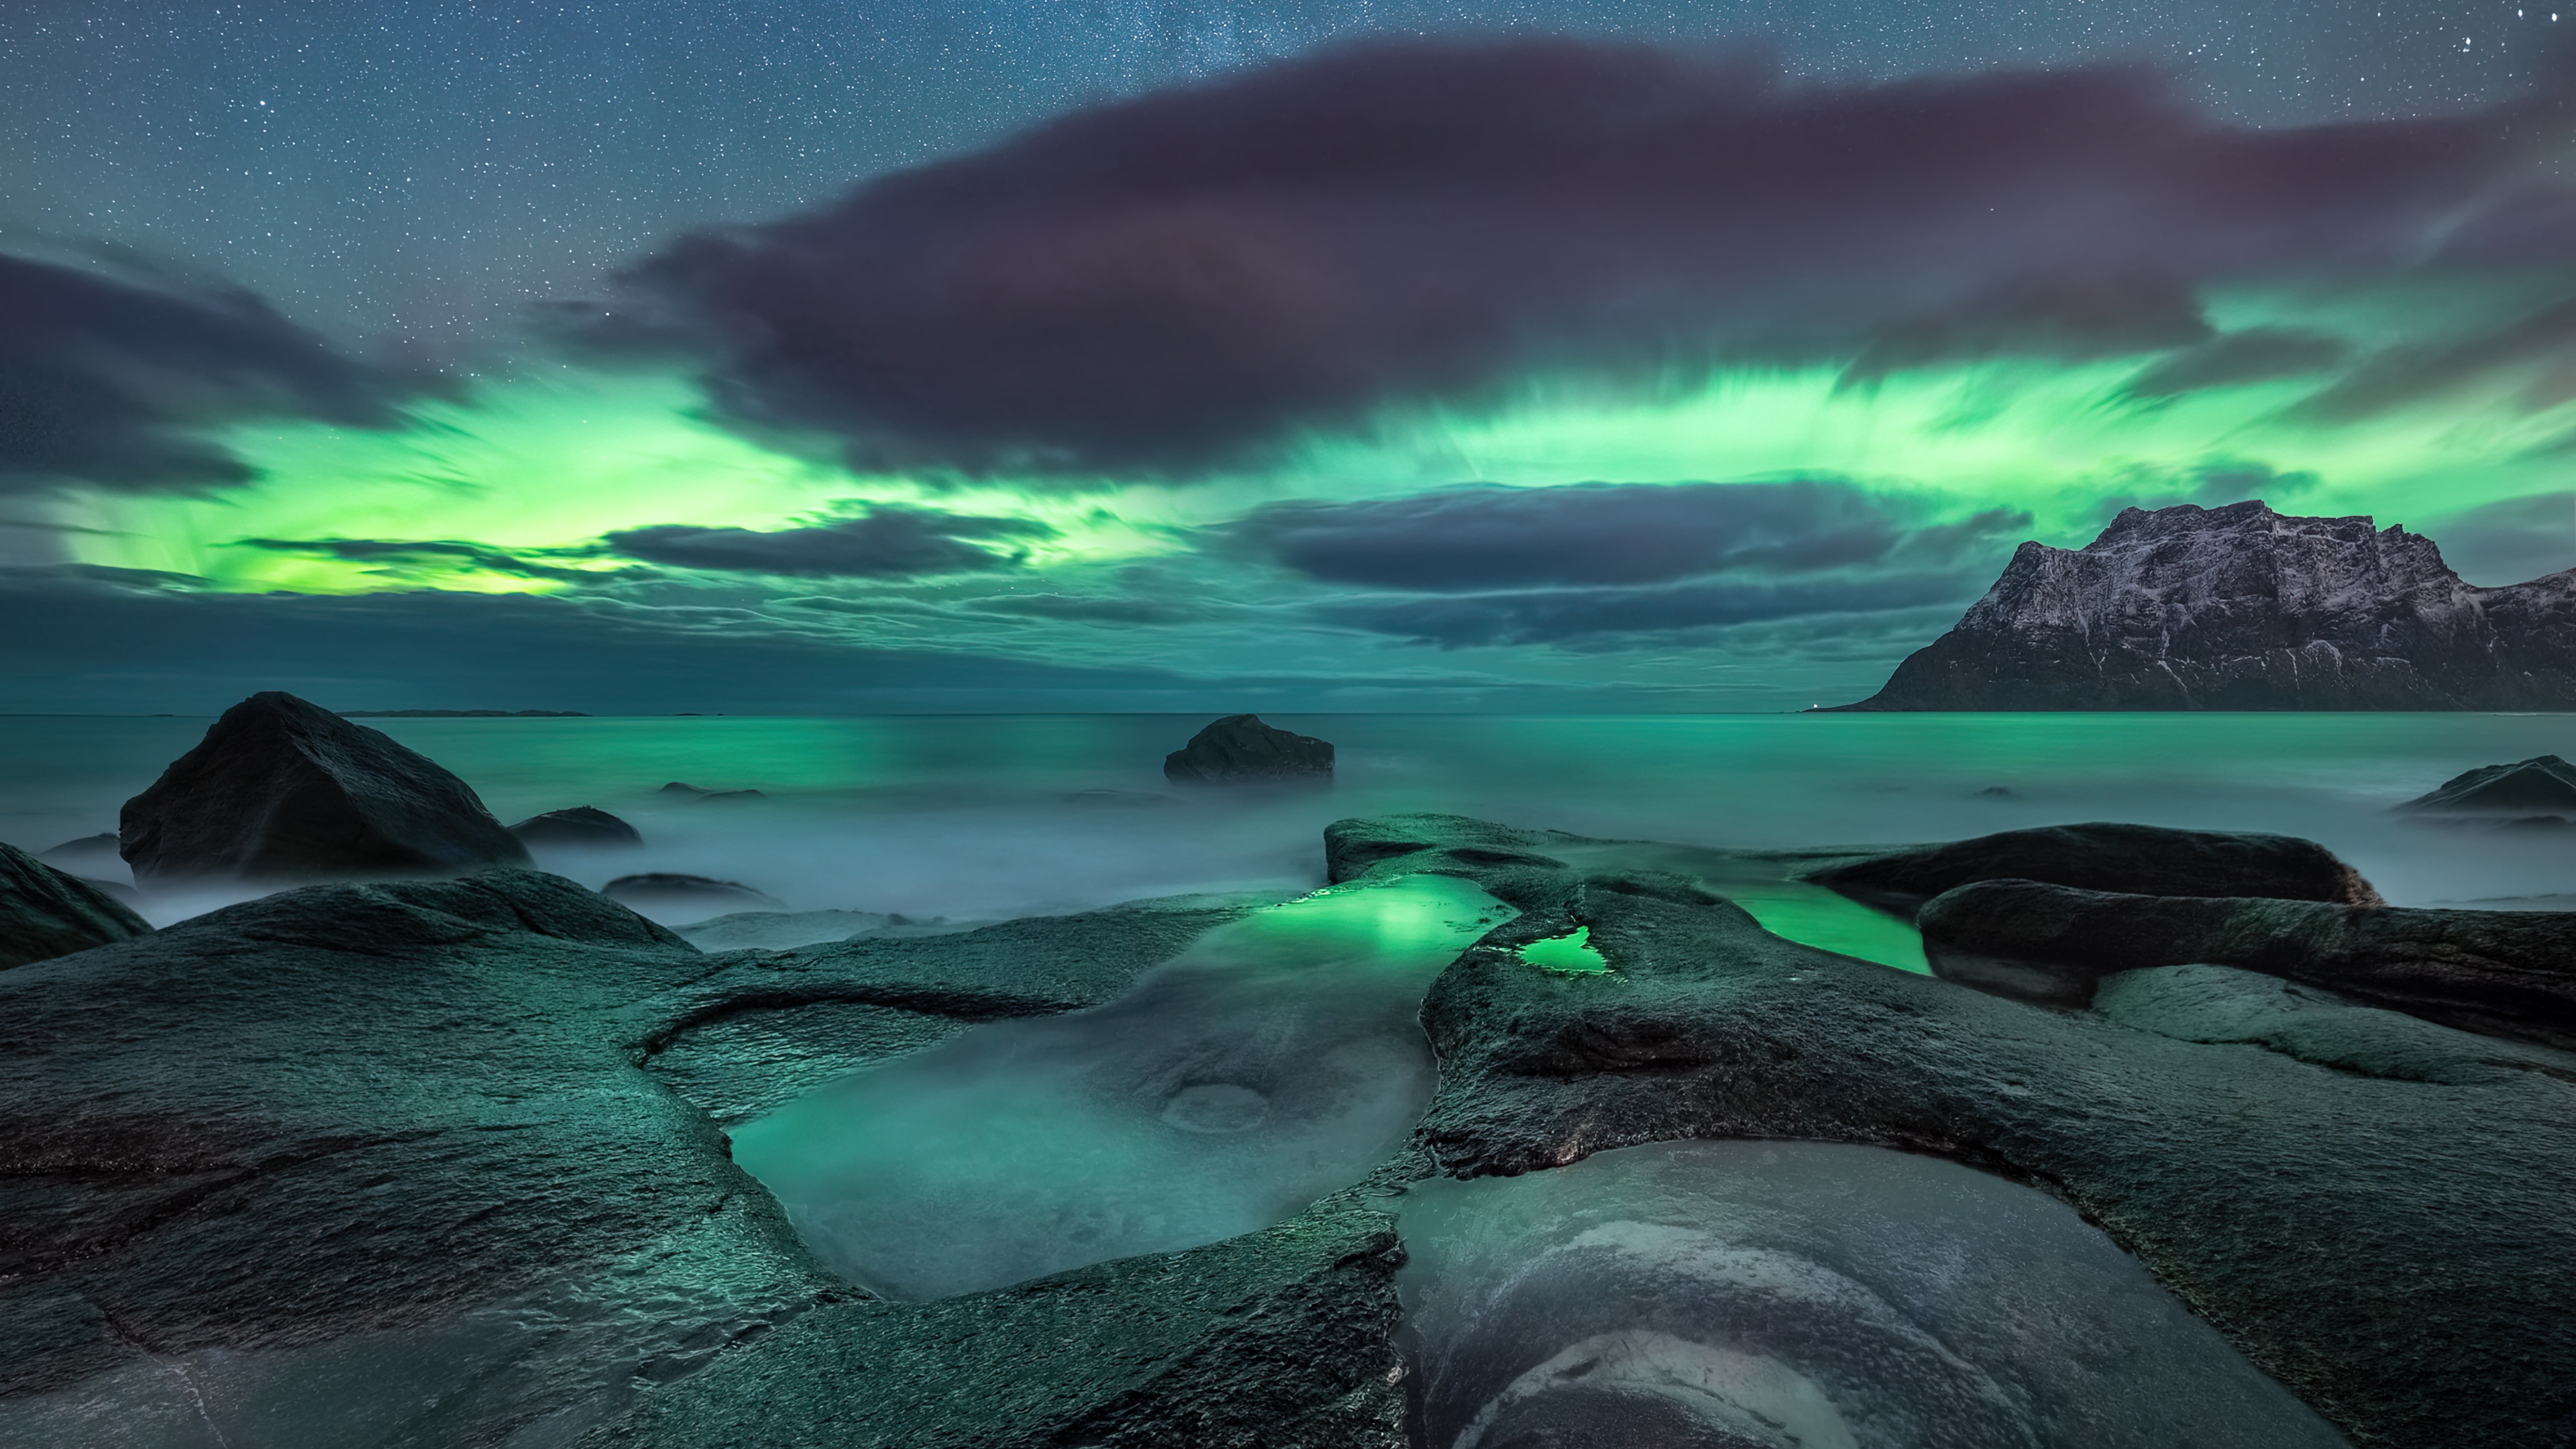 General 3840x2160 landscape photography sea water rocks rock formation mountains clouds stars long exposure low light aurorae